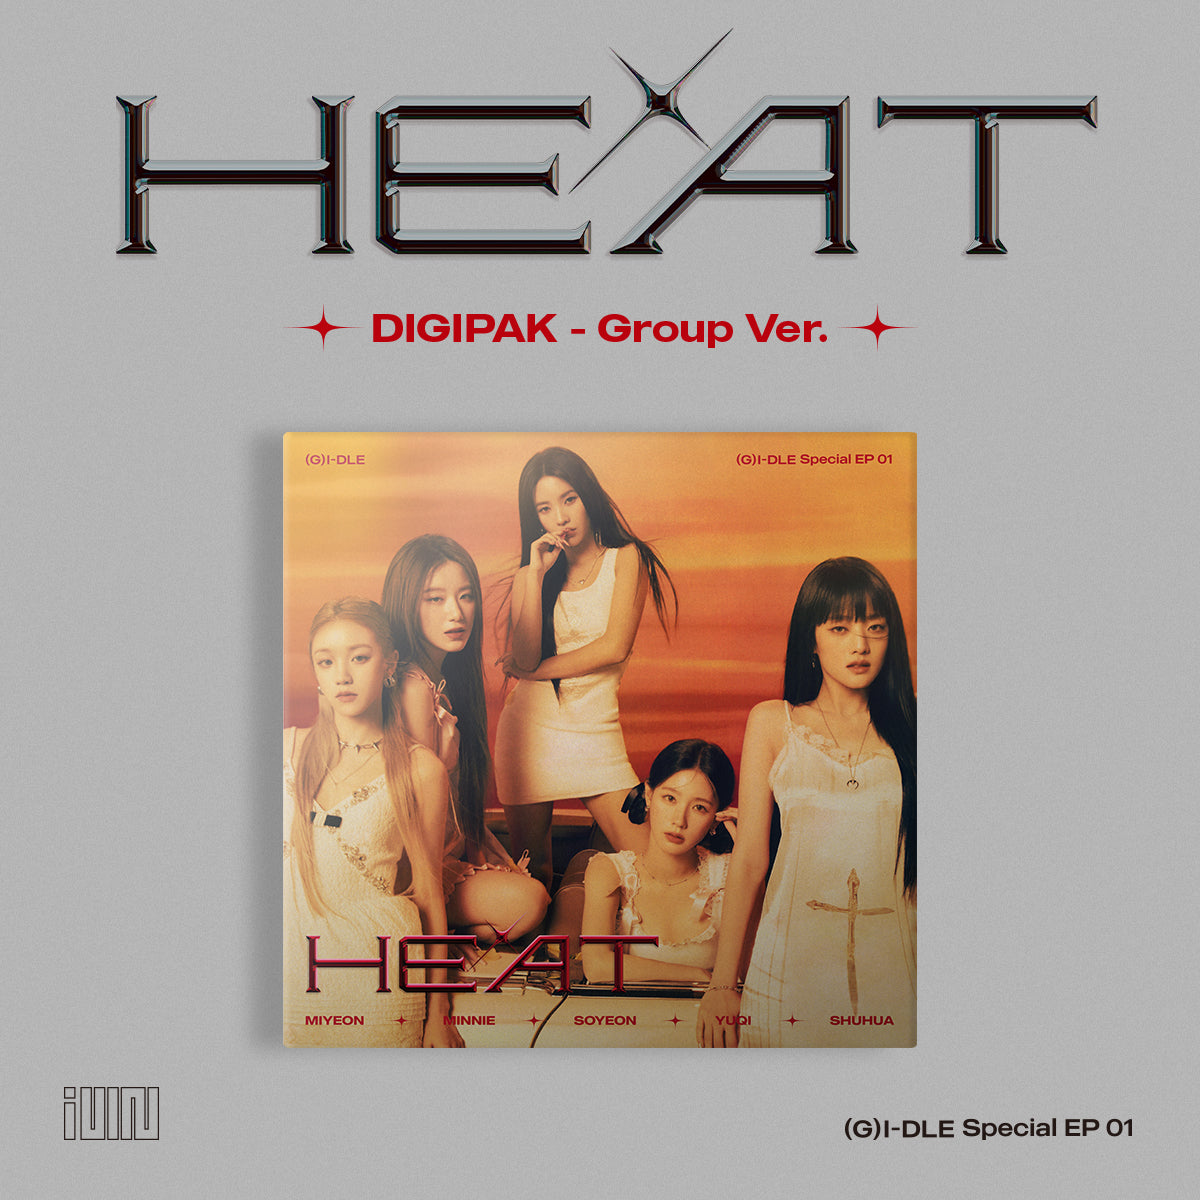 (G)I-DLE Special EP 01 HEAT (Digipack Group Version)